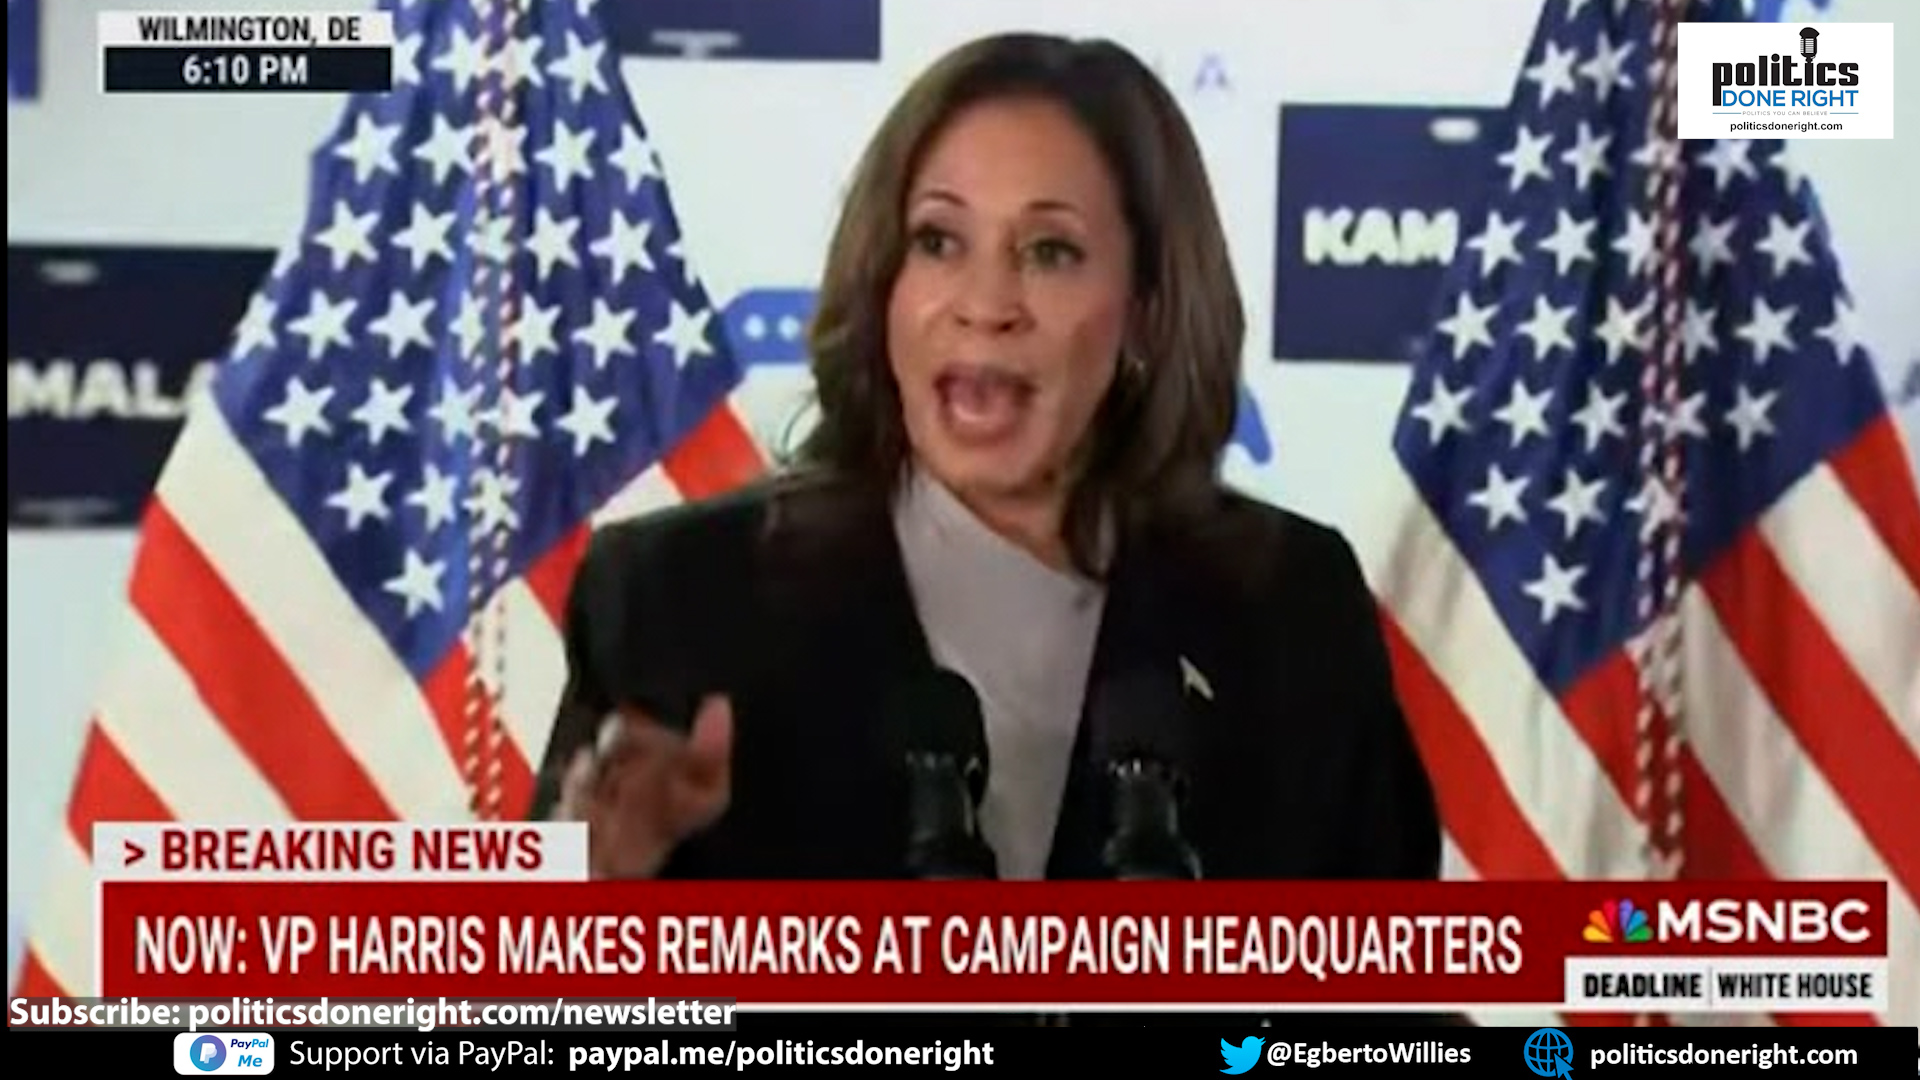 Kamala Harris 1st speech destroys Trump & Project 2025. Pivots to the future. We're not going back!